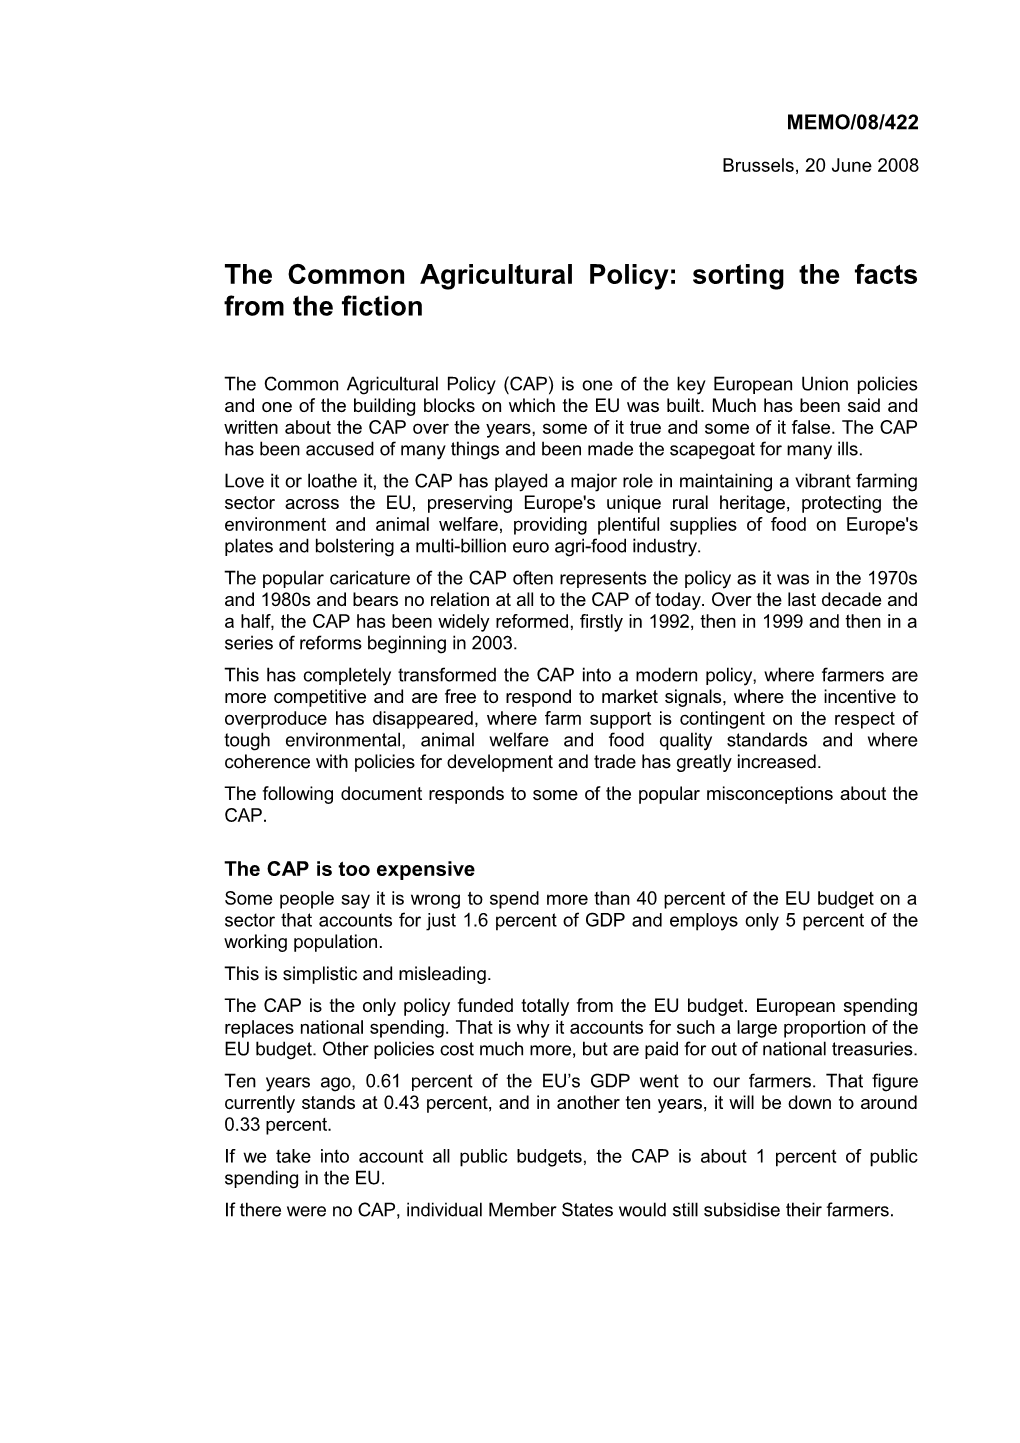 The Common Agricultural Policy: Sorting the Facts from the Fiction